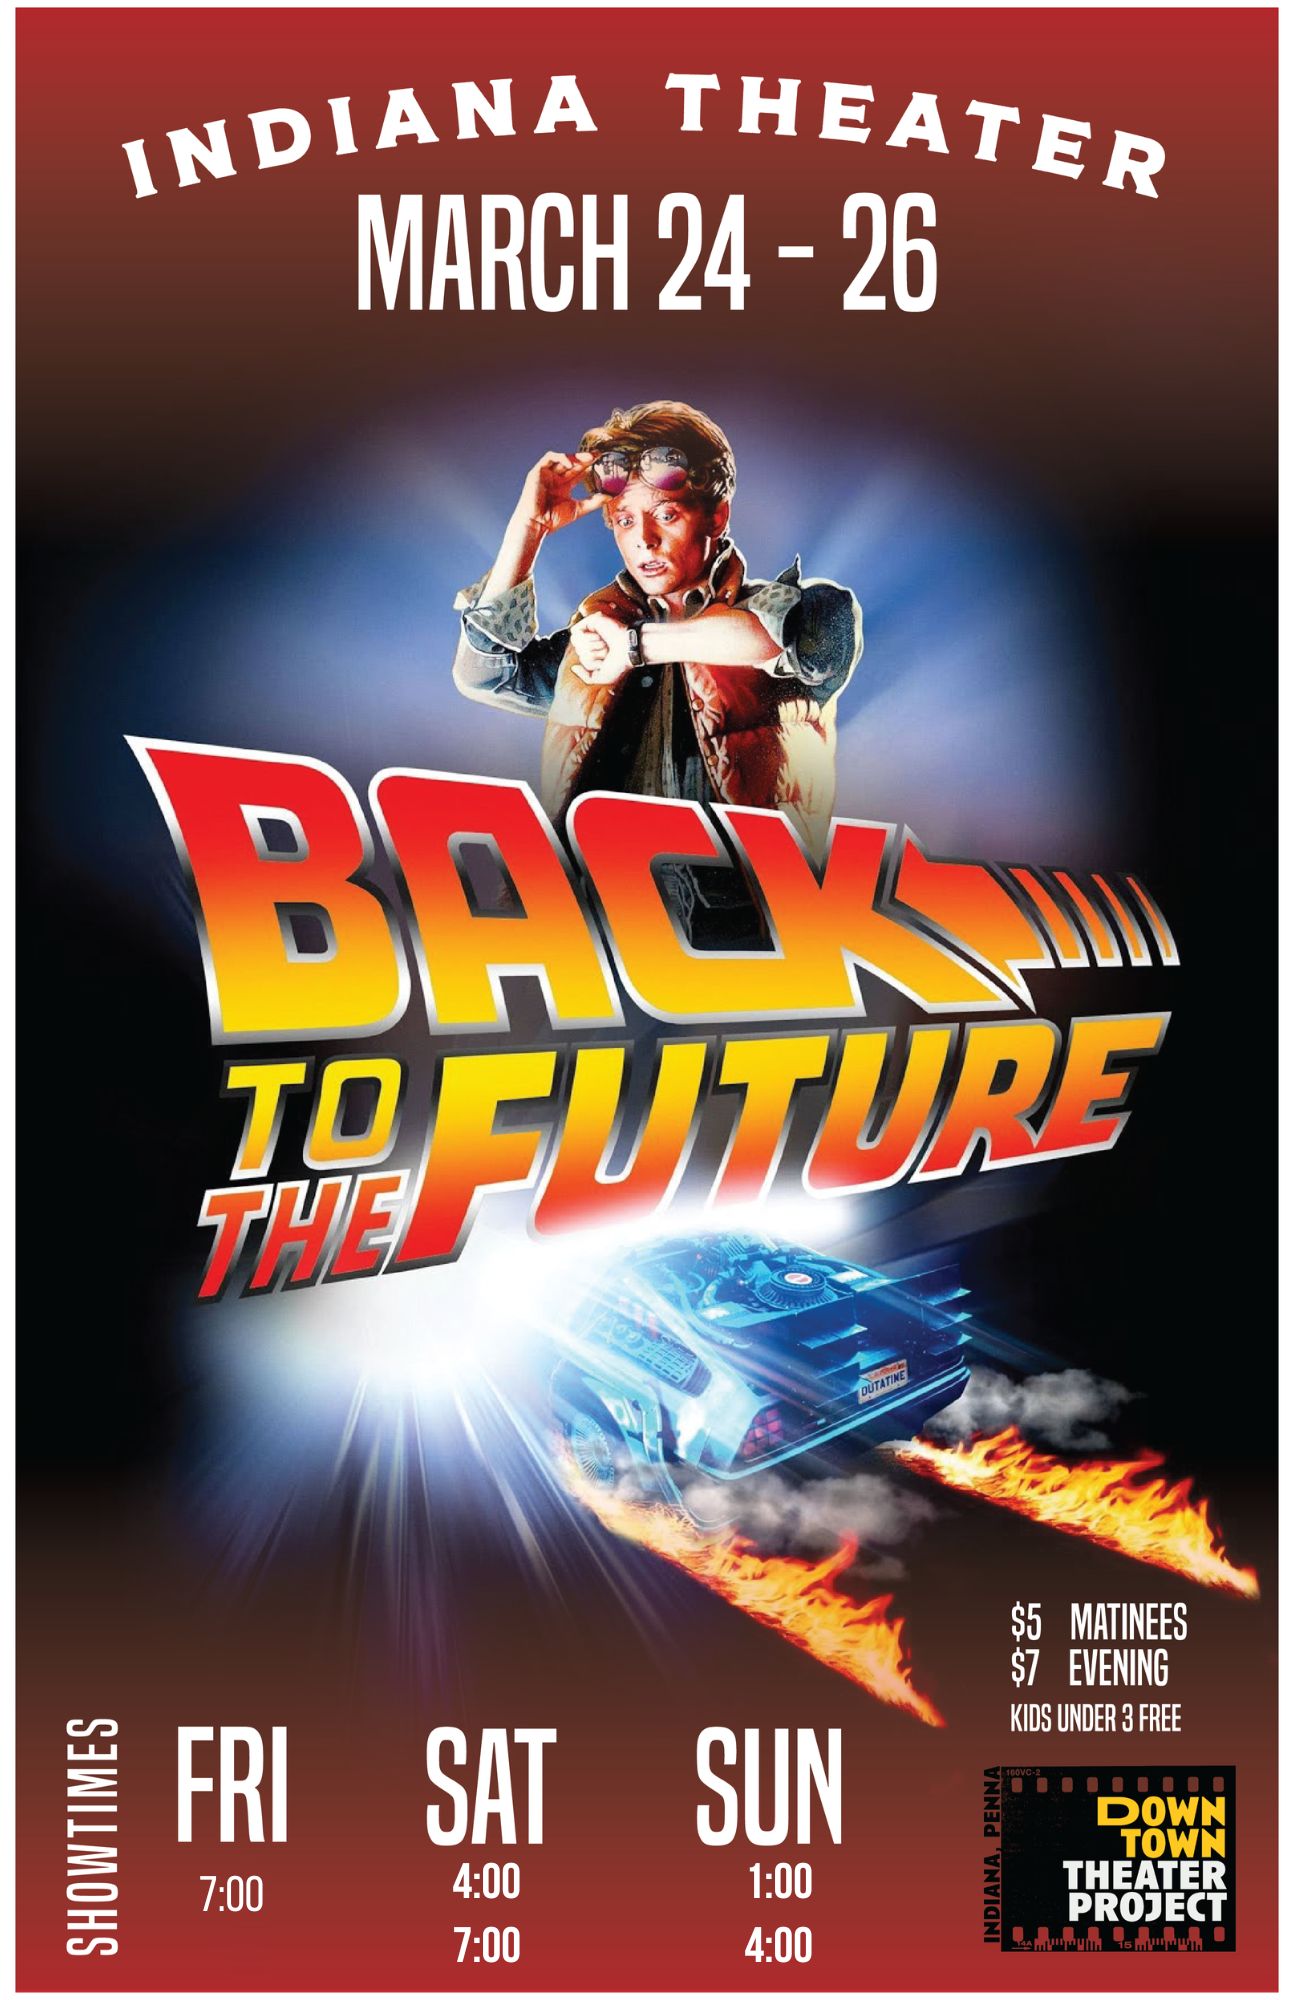 Back to the Future - Visit Indiana County Pennsylvania